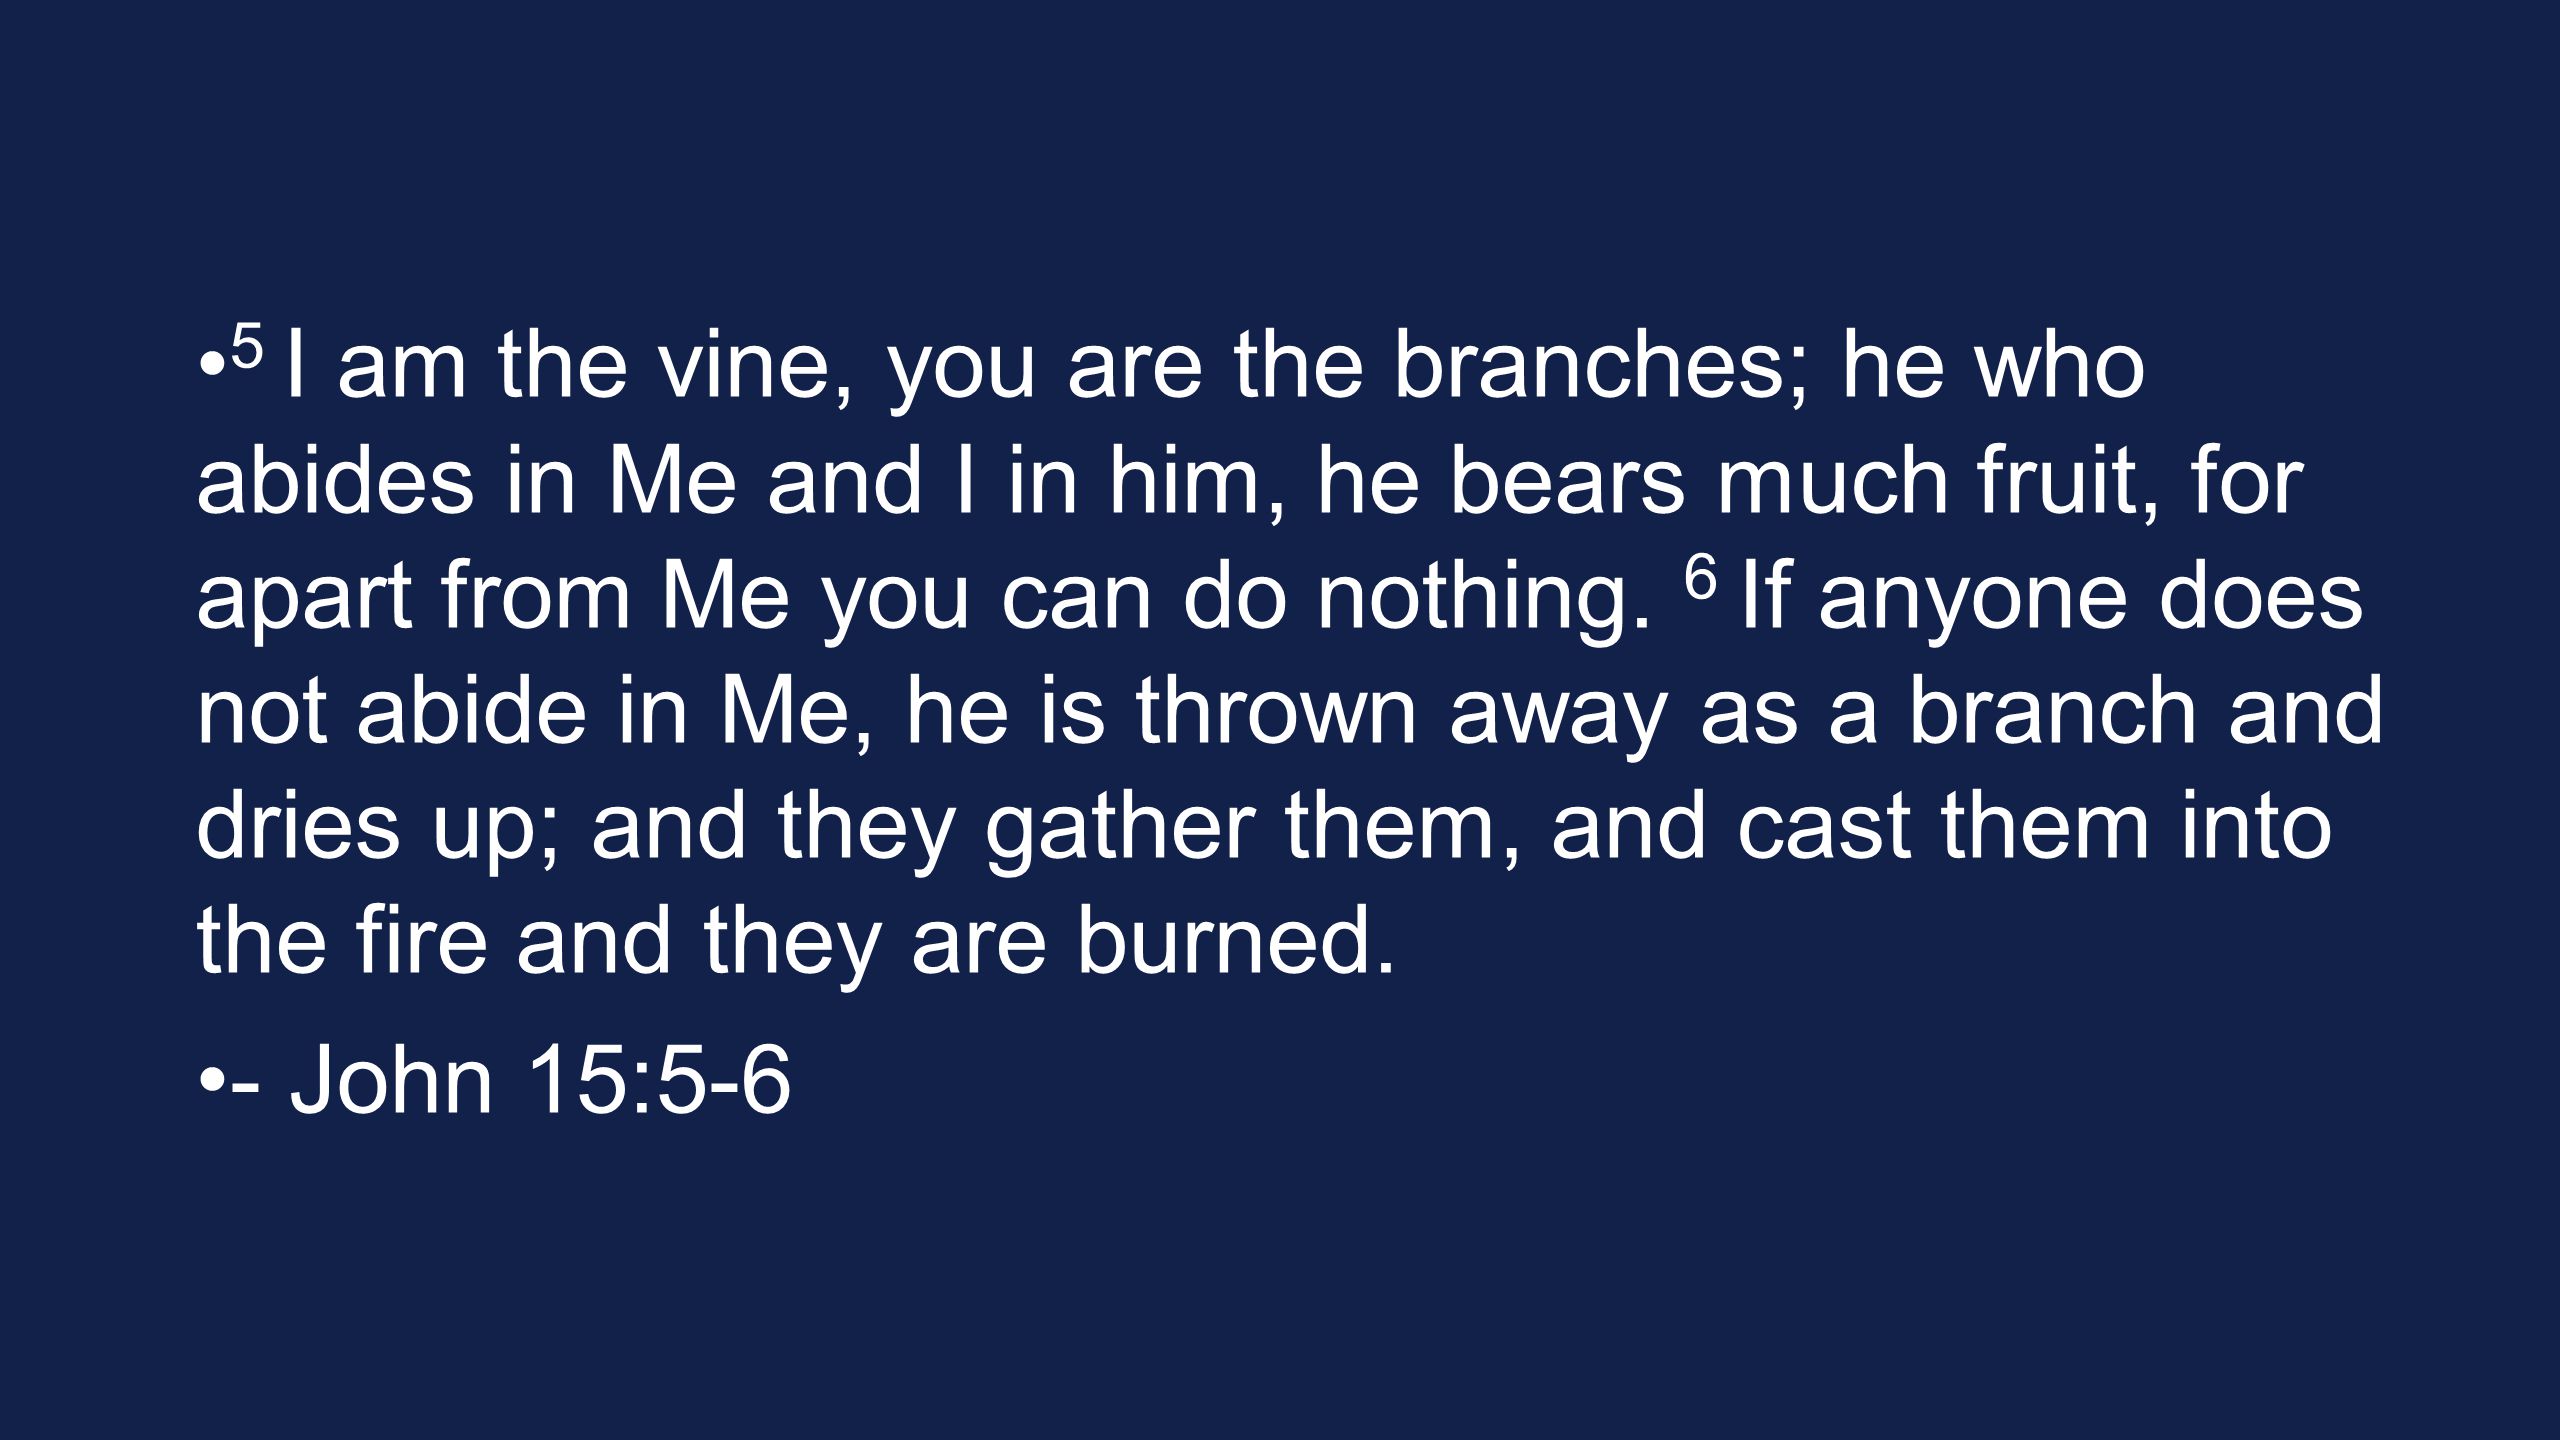 5 I am the vine, you are the branches; he who abides in Me and I in him, he bears much fruit, for apart from Me you can do nothing.